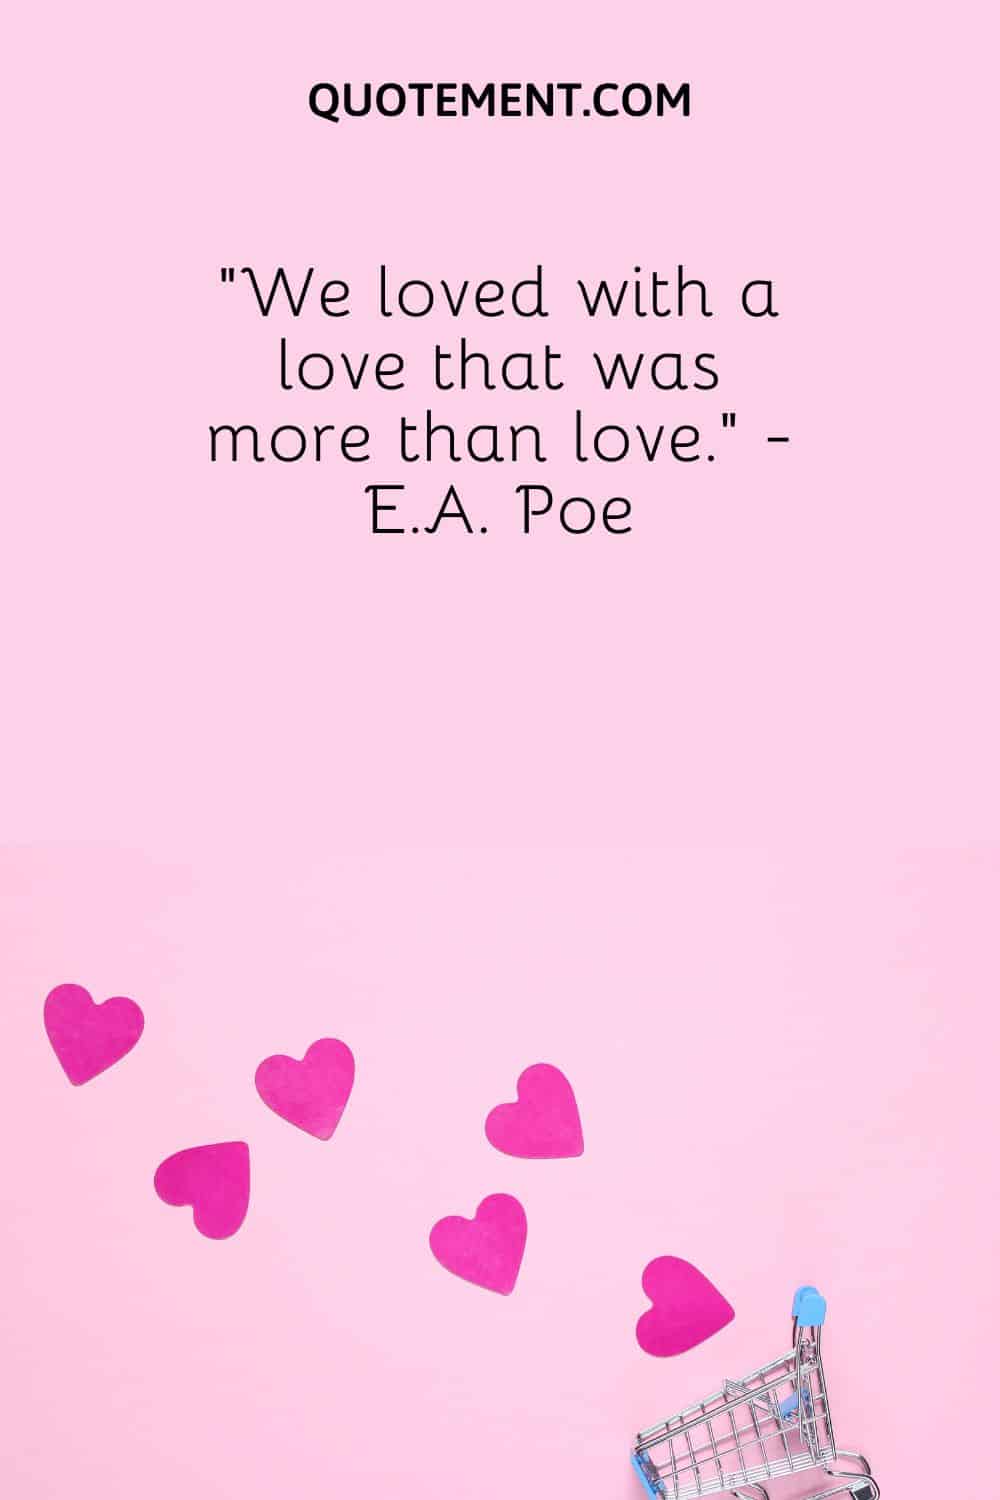 “We loved with a love that was more than love.” - E.A. Poe